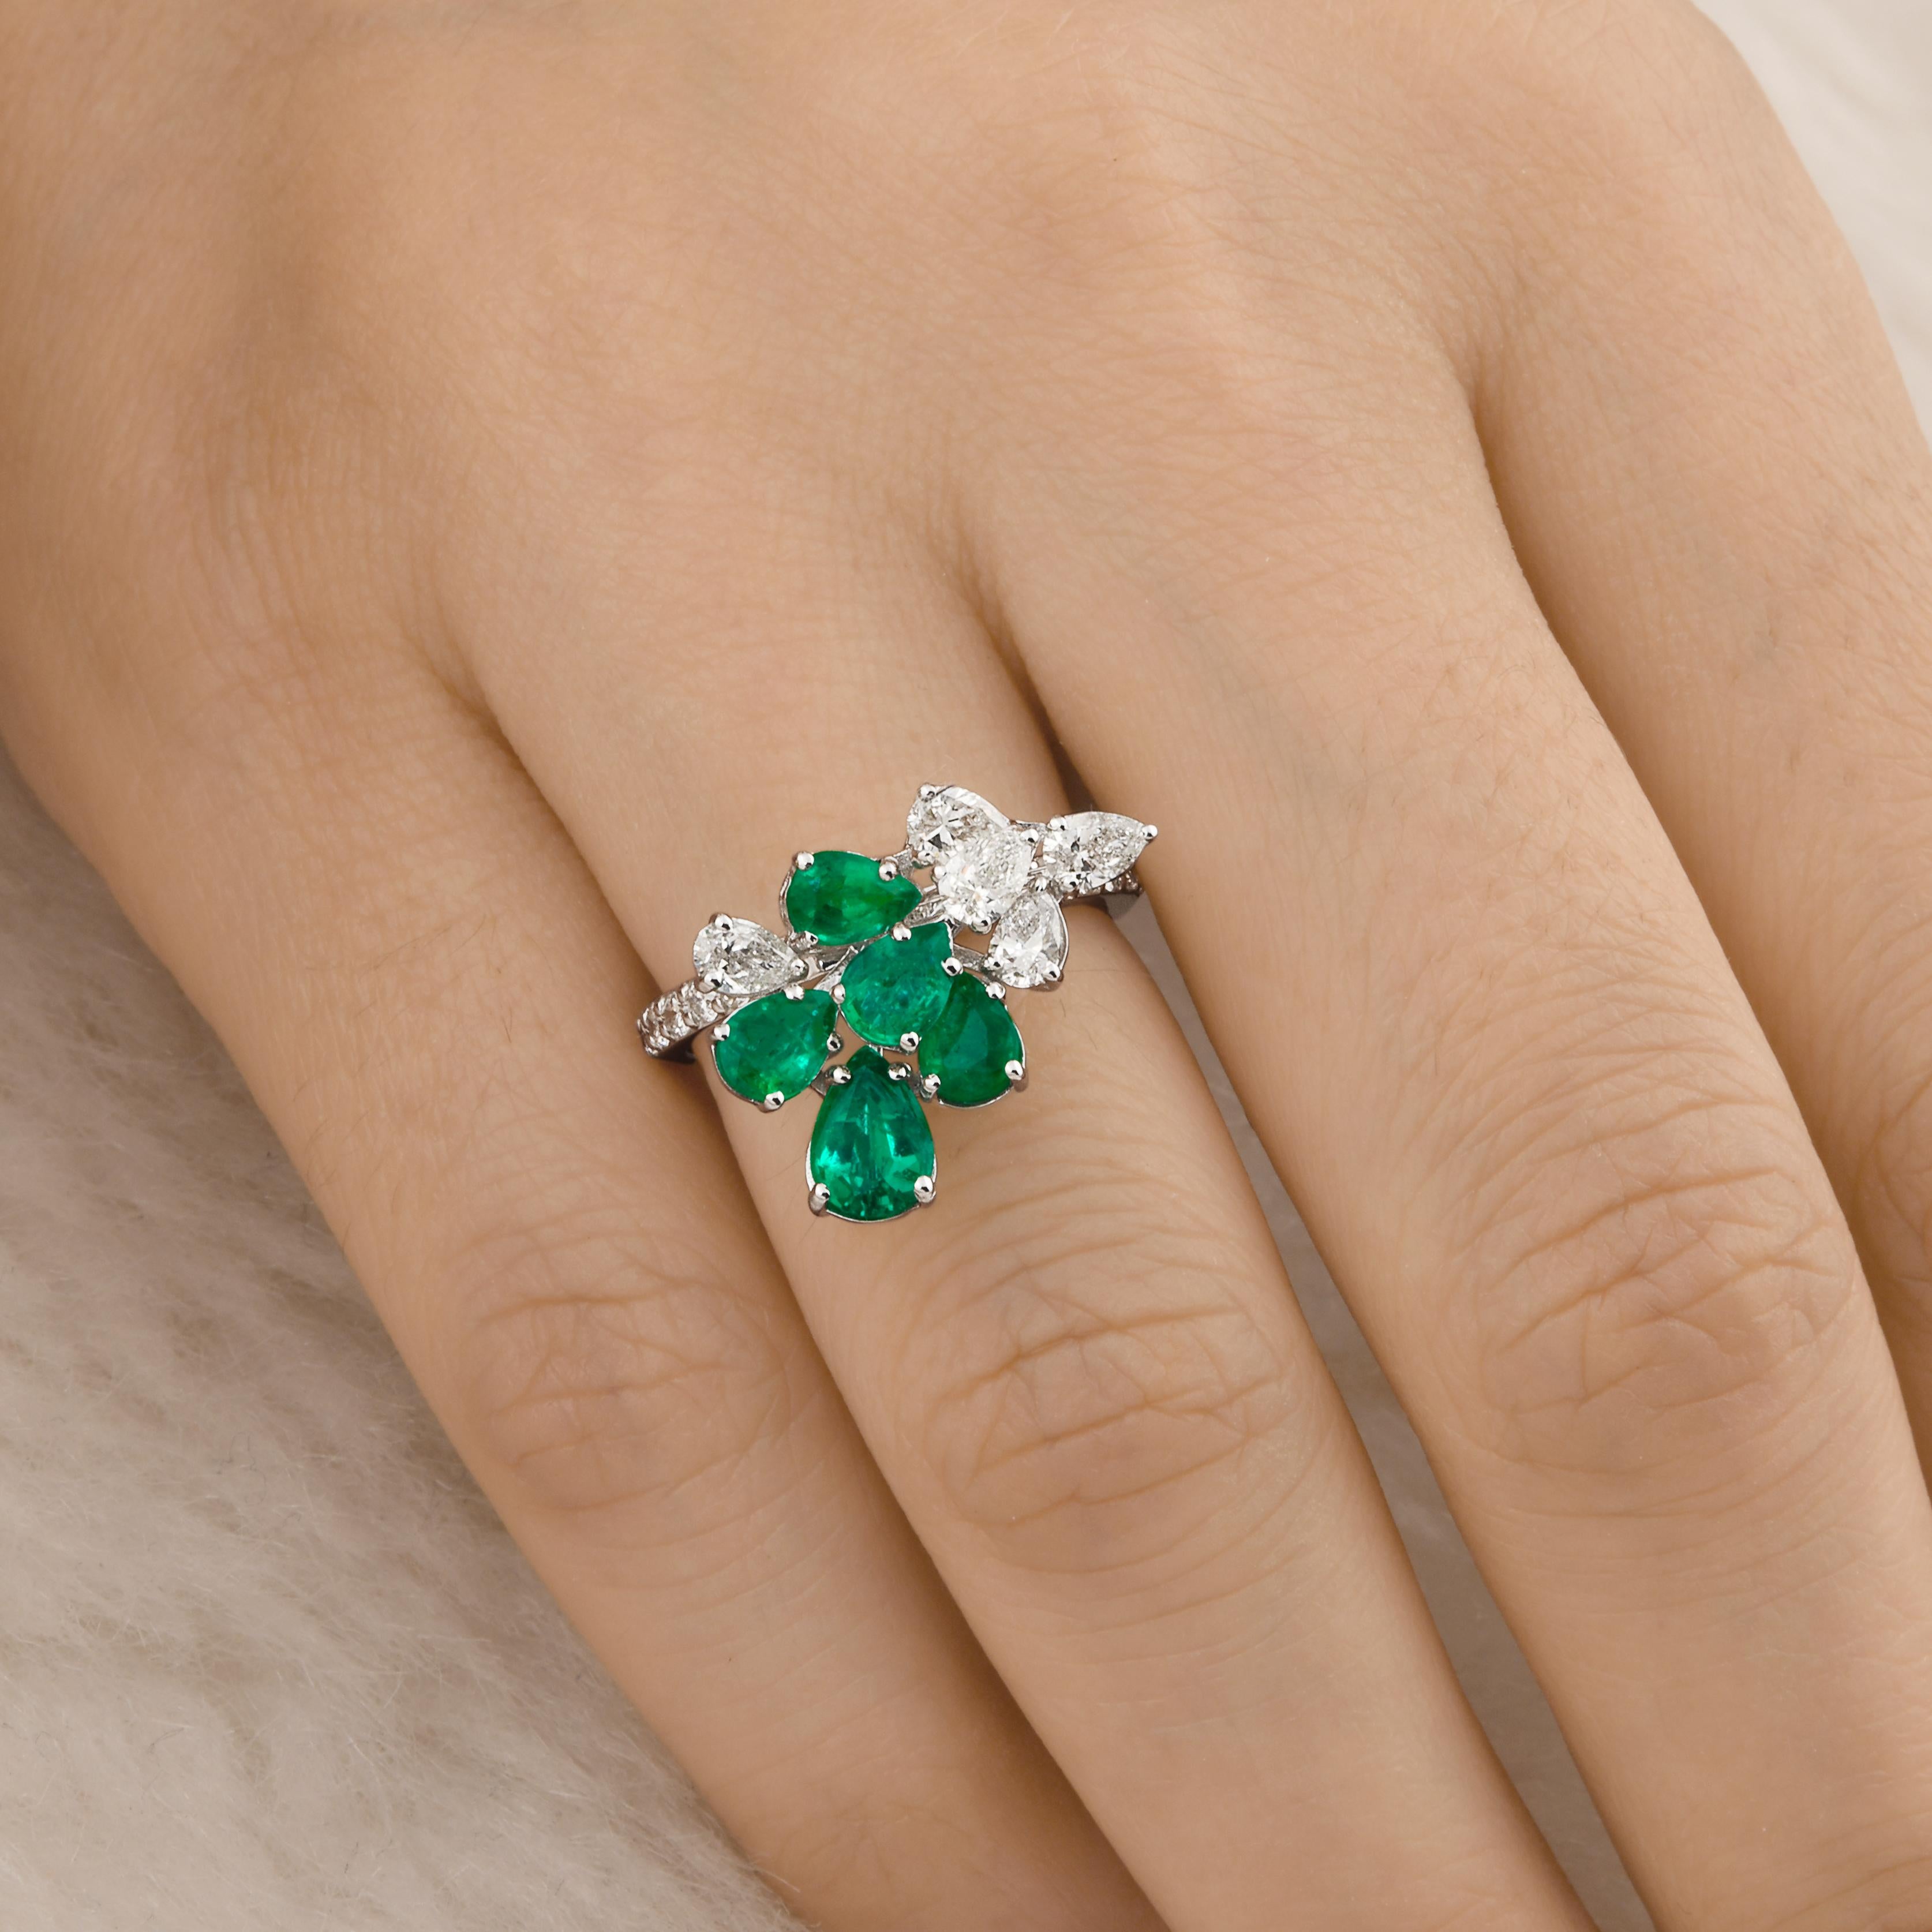 For Sale:  Pear Natural Emerald Gemstone Ring Pear Diamond Solid 18k White Gold Jewelry 4